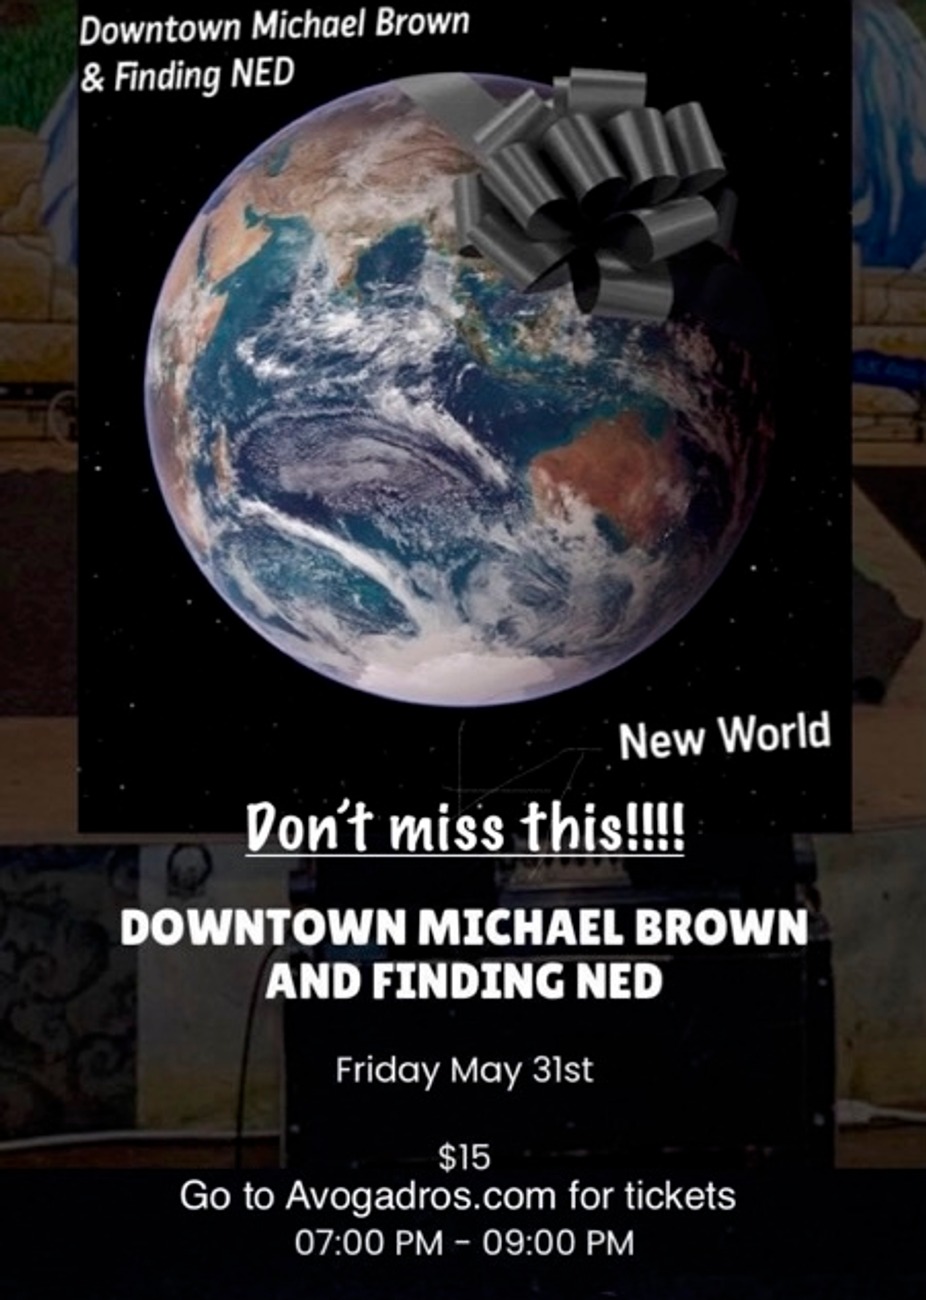 Downtown Michael Brown and Finding Ned event photo